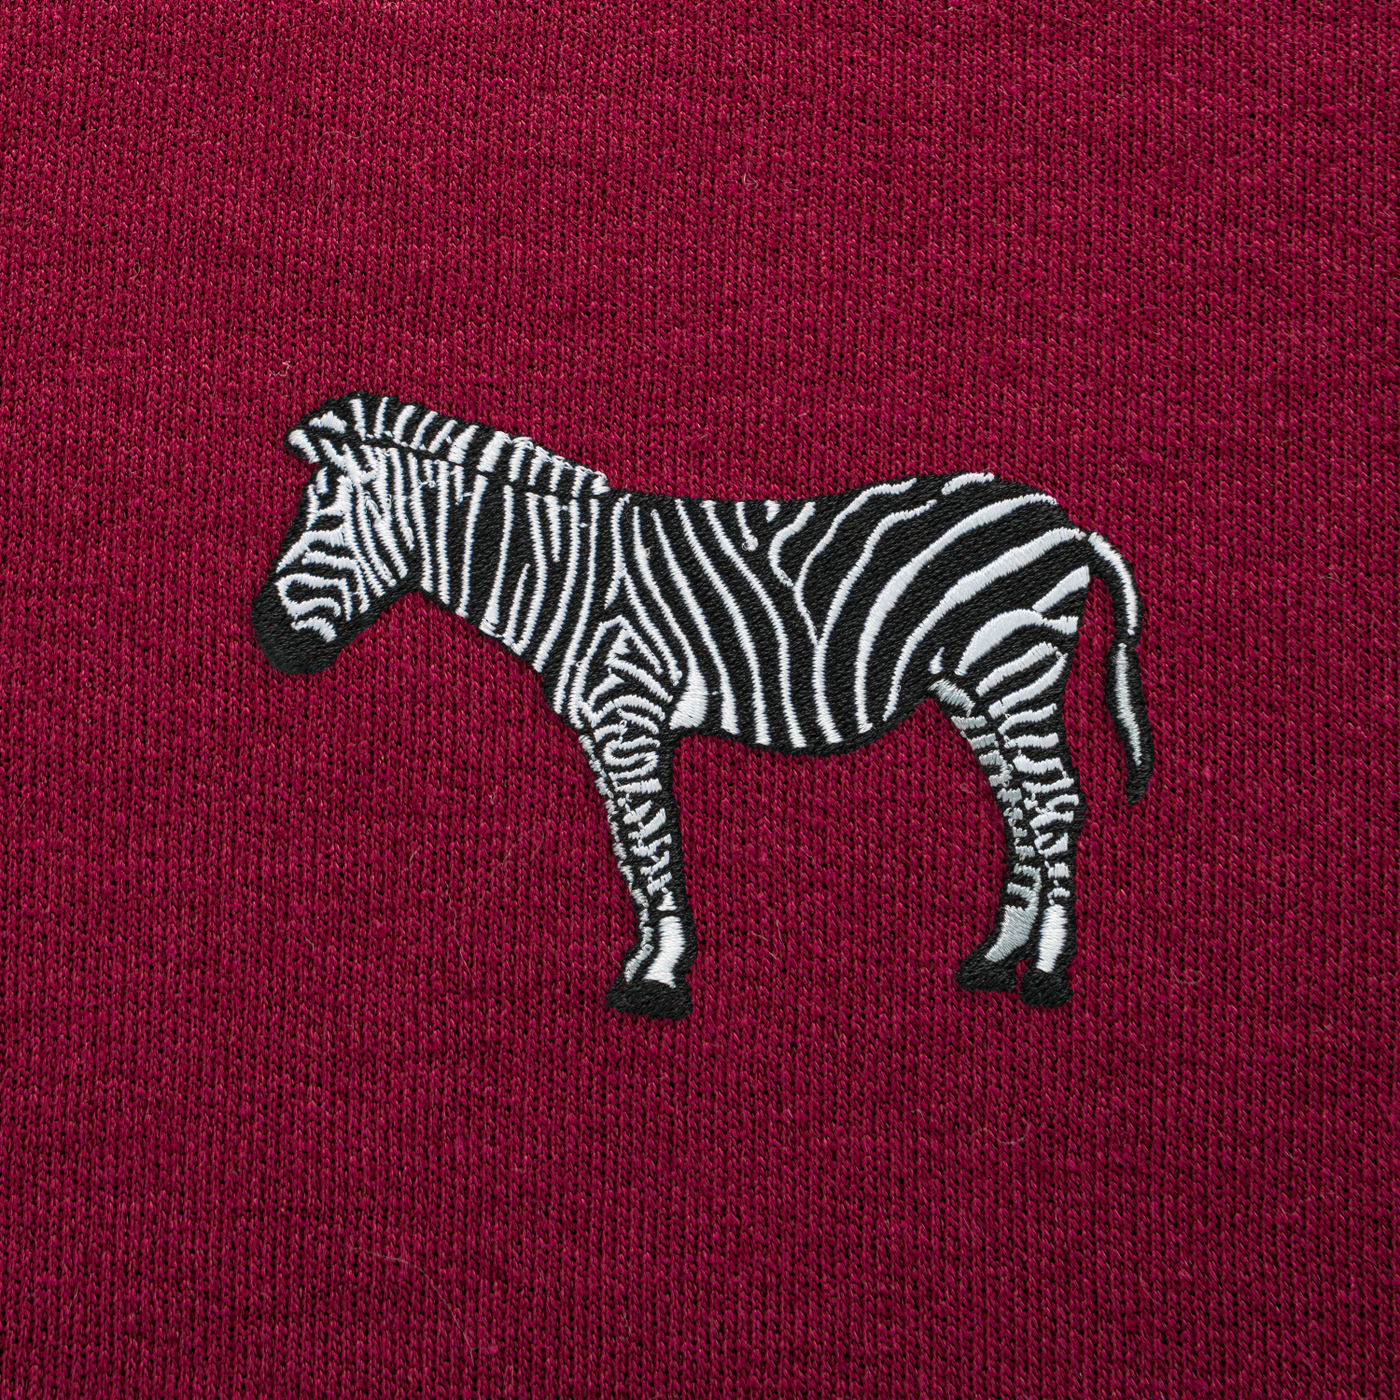 Bobby's Planet Men's Embroidered Zebra Sweatshirt from African Animals Collection in Maroon Color#color_maroon